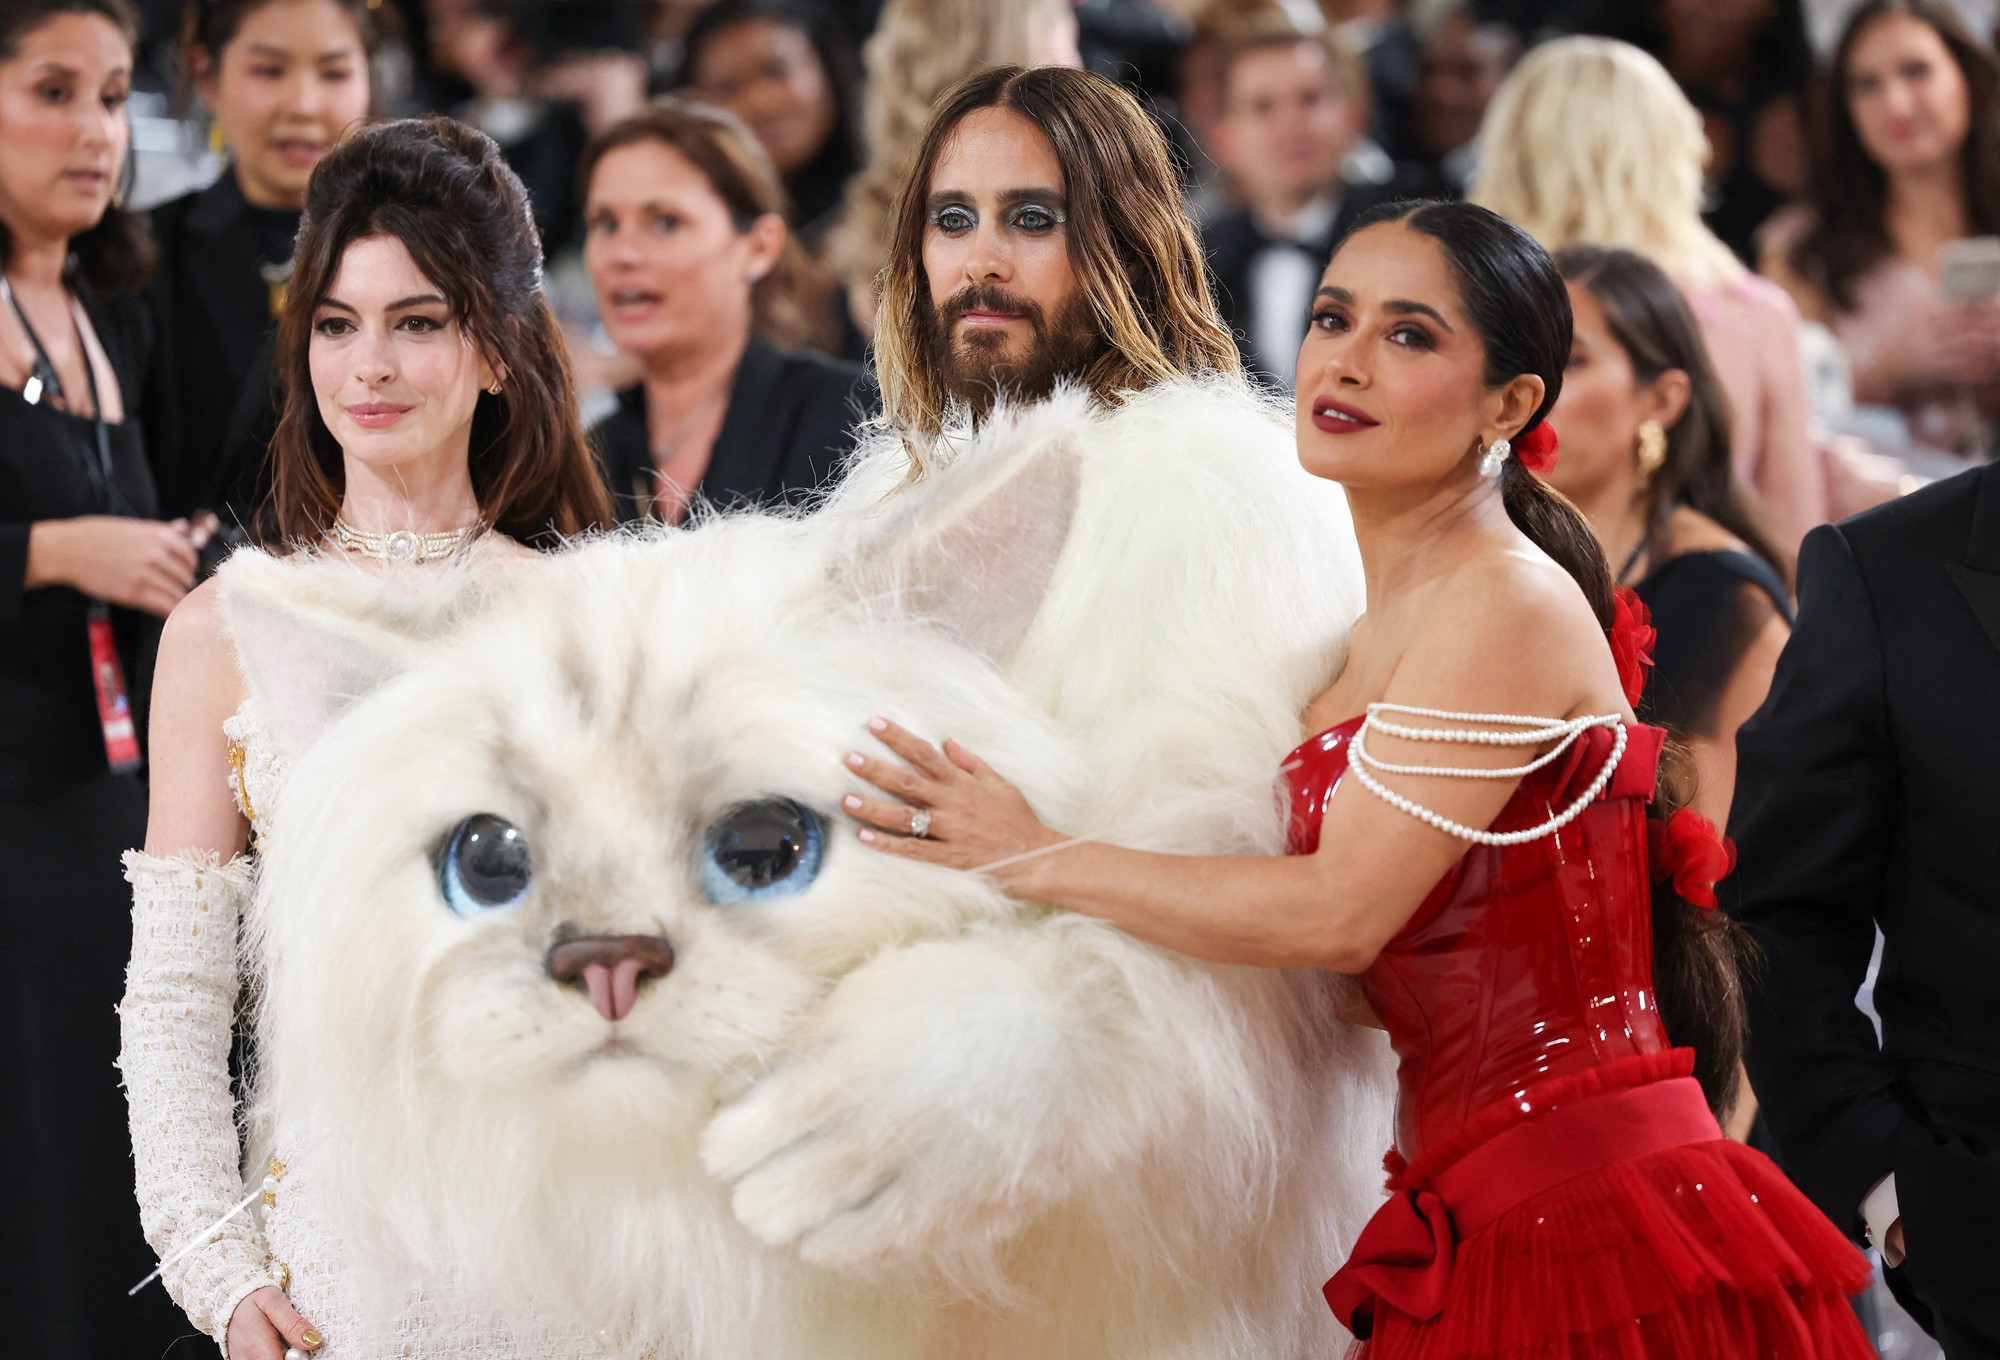 Anne, and Salma poses with Jared who is holding a giant white cat head.